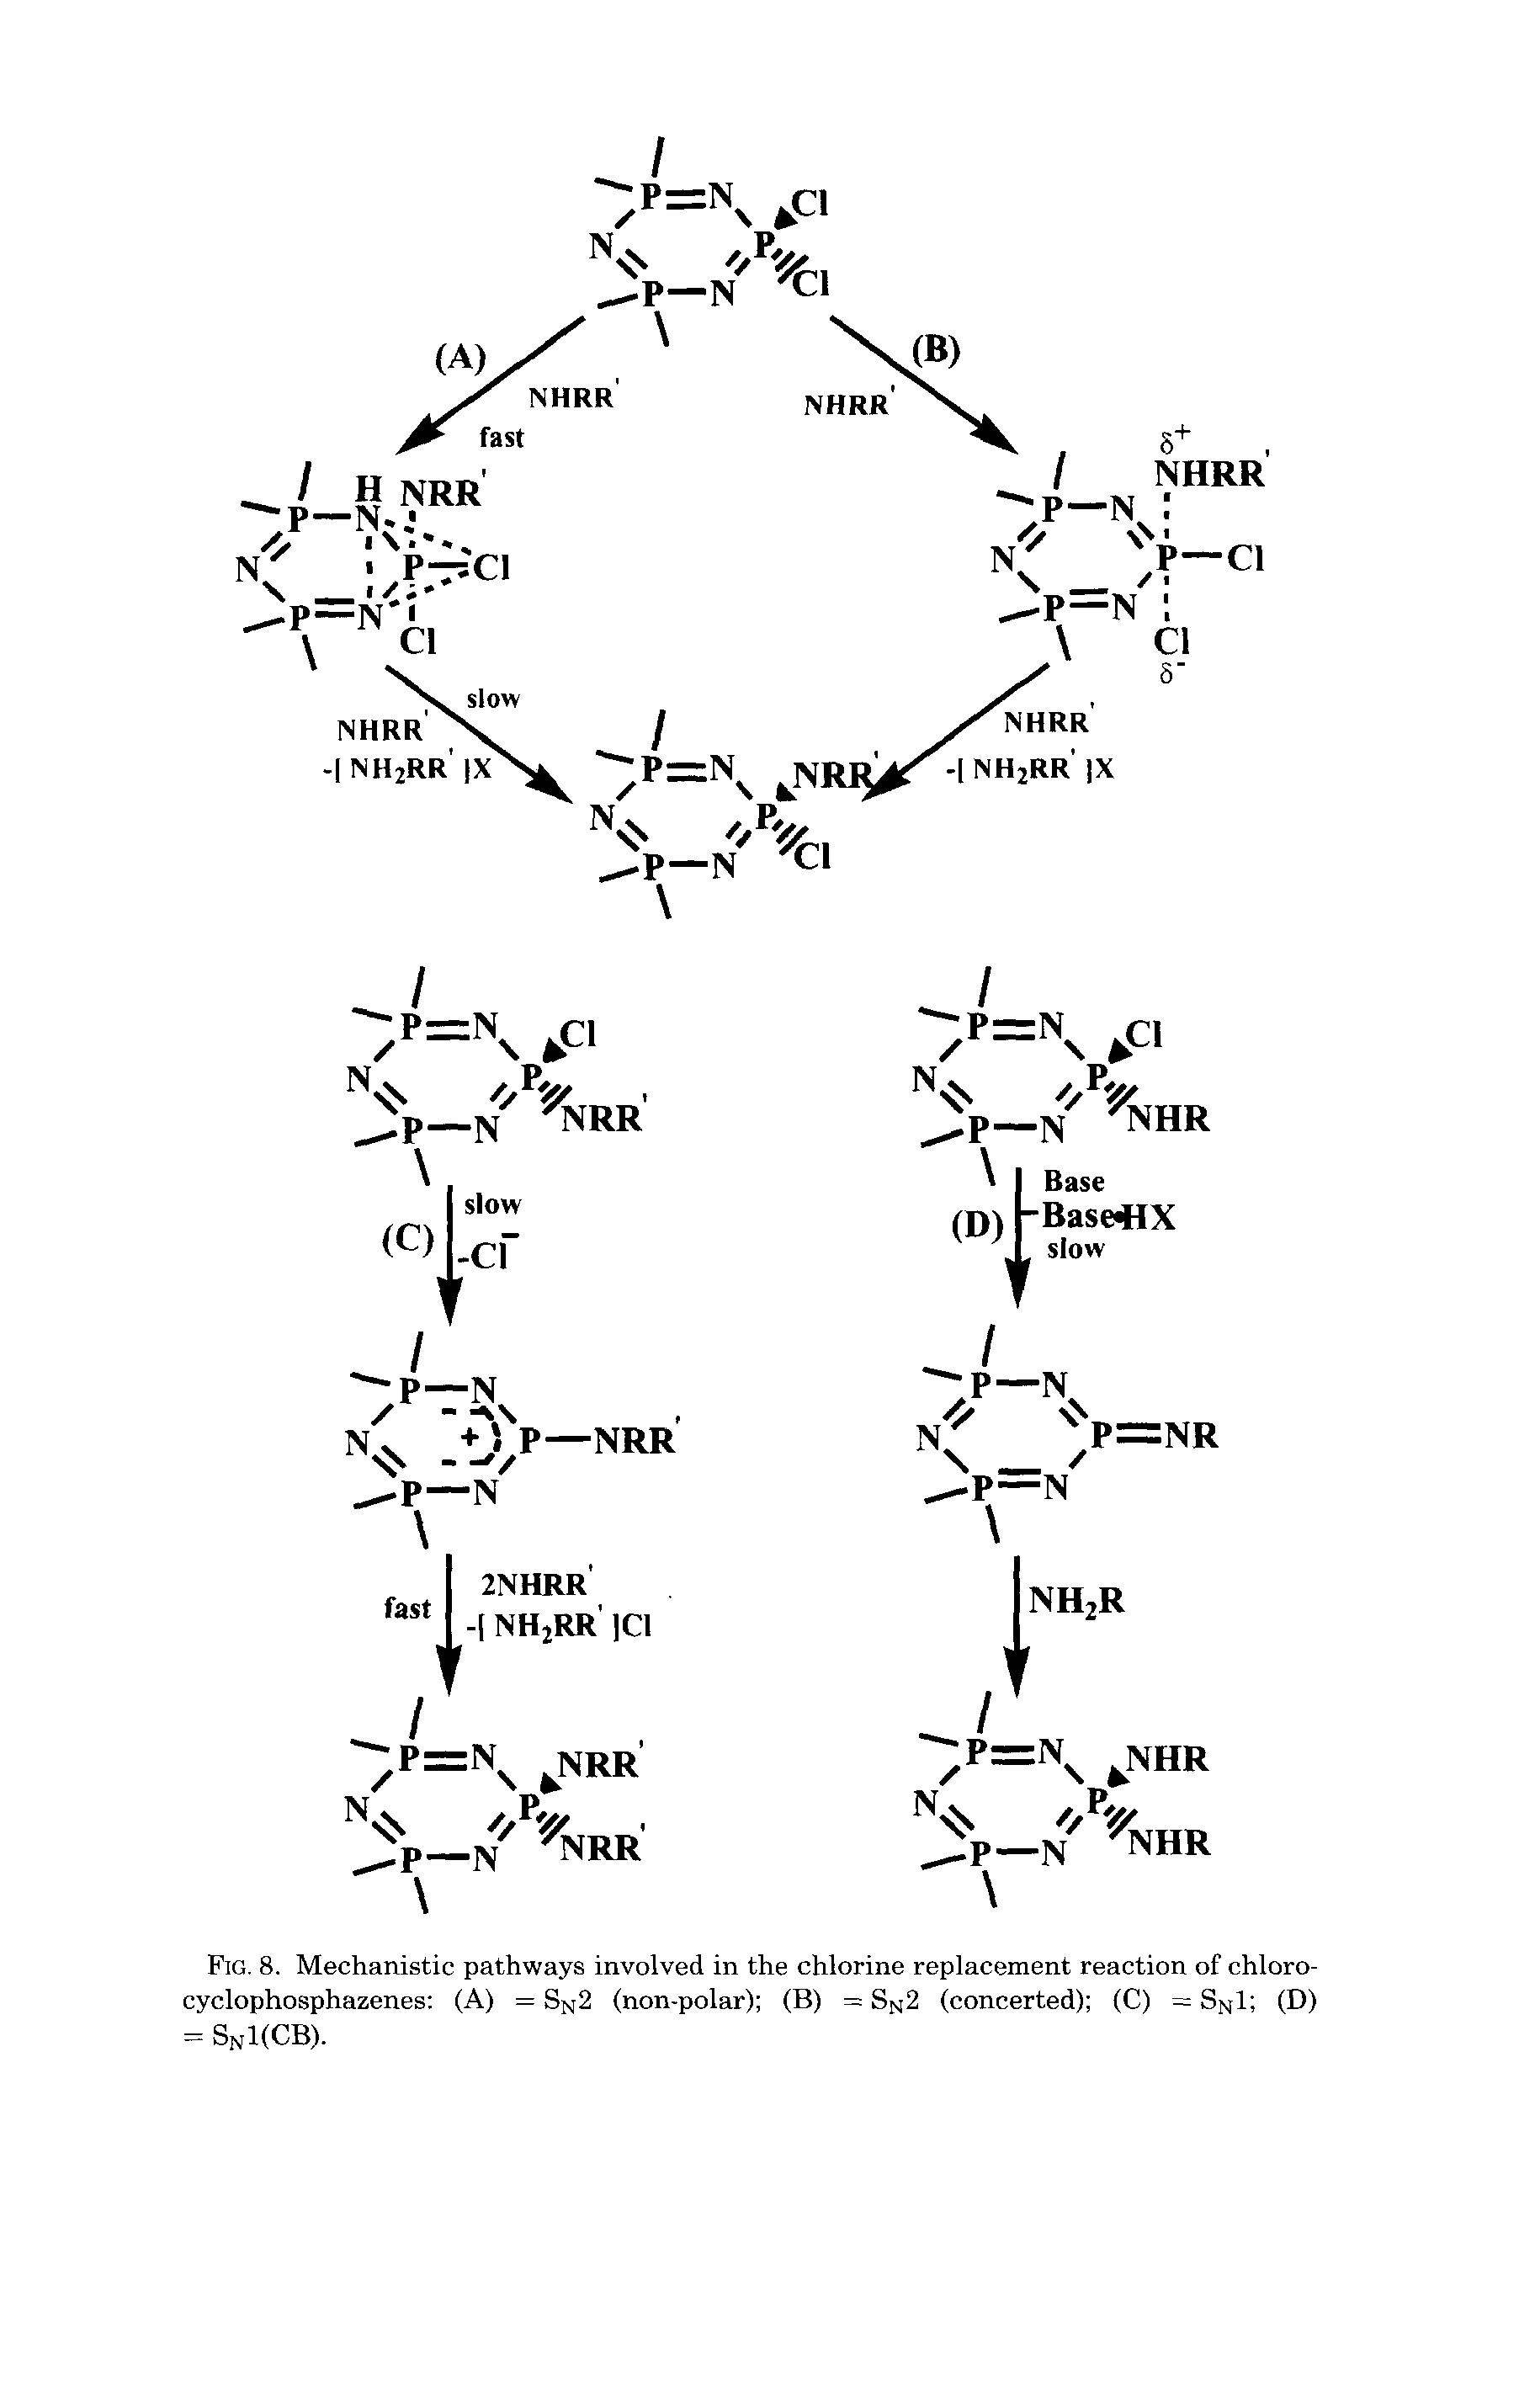 Fig. 8. Mechanistic pathways involved in the chlorine replacement reaction of chloro-cyclophosphazenes (A) = S 2 (non-polar) (B) = S 2 (concerted) (C) = S l (D) = SnI(CB).